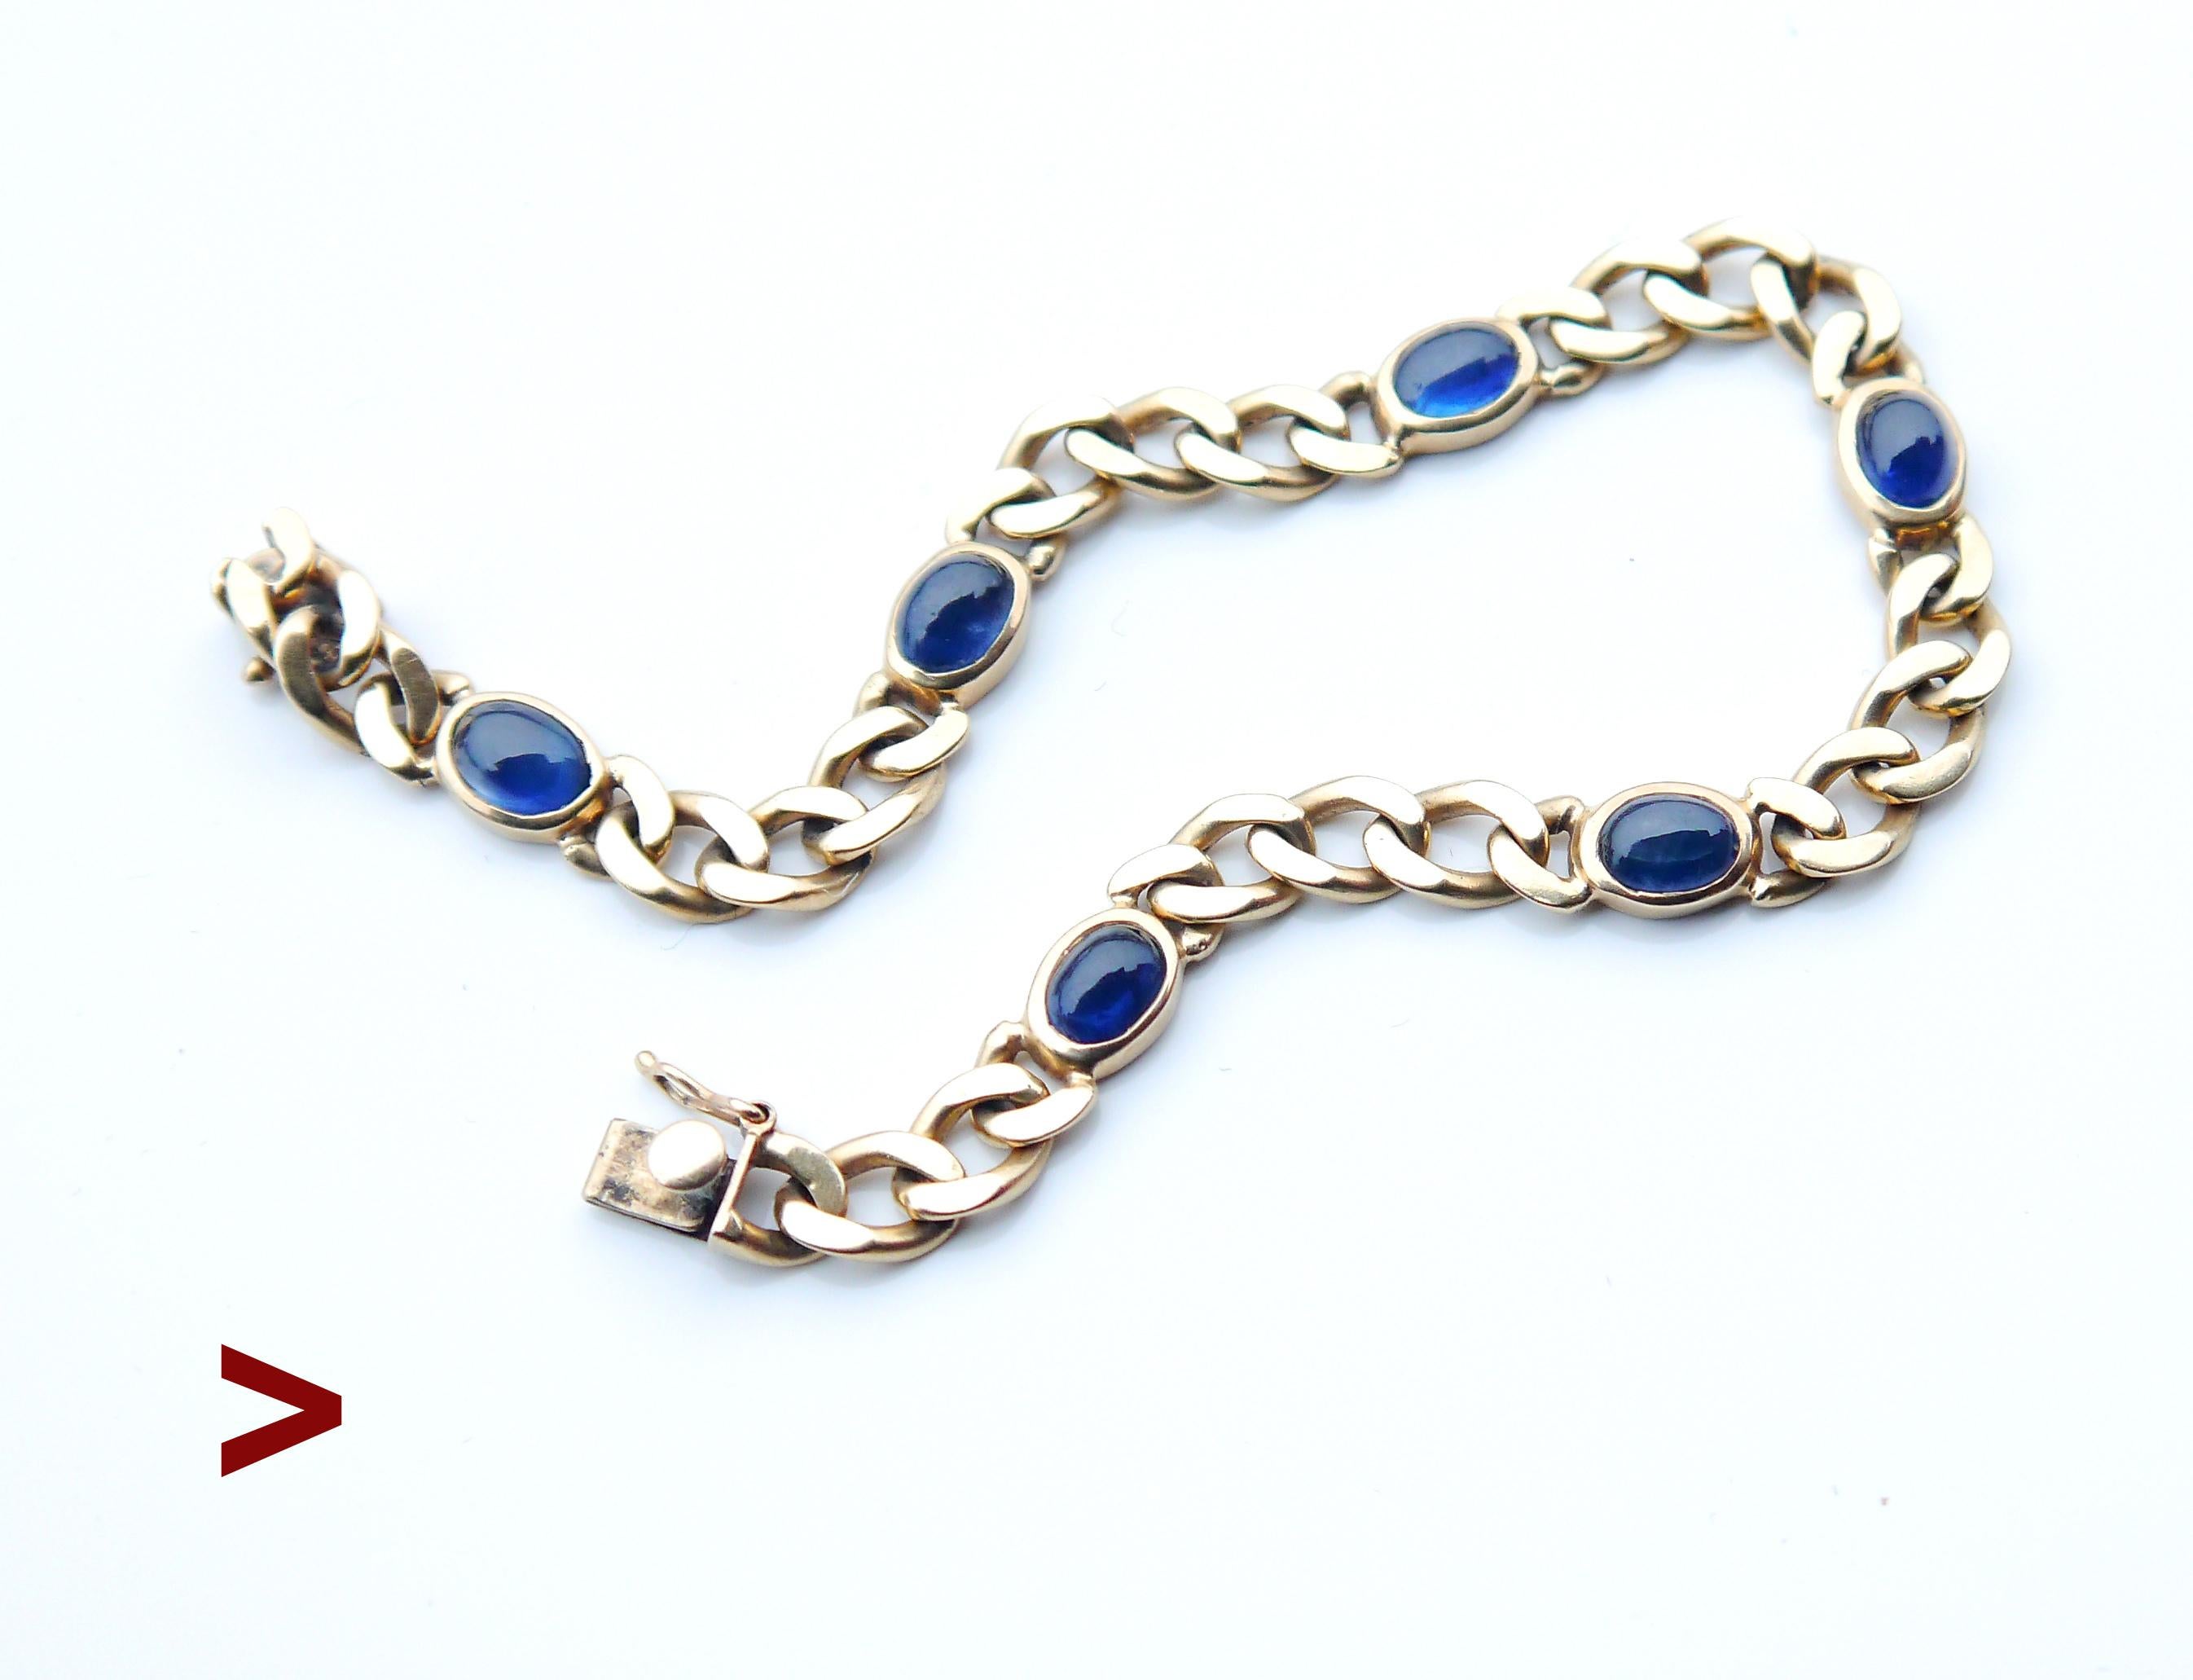 Bracelet from 1950 - 1960s for Men and Women in solid 14K Yellow Gold decorated with six natural Blue Sapphire stones cur cabochons.Hallmarked / tested solid 14K Yellow Gold metal.

Each stone measuring ca. 6 mm x 4 mm x 3.5 mm / ca. 0.75ct each /